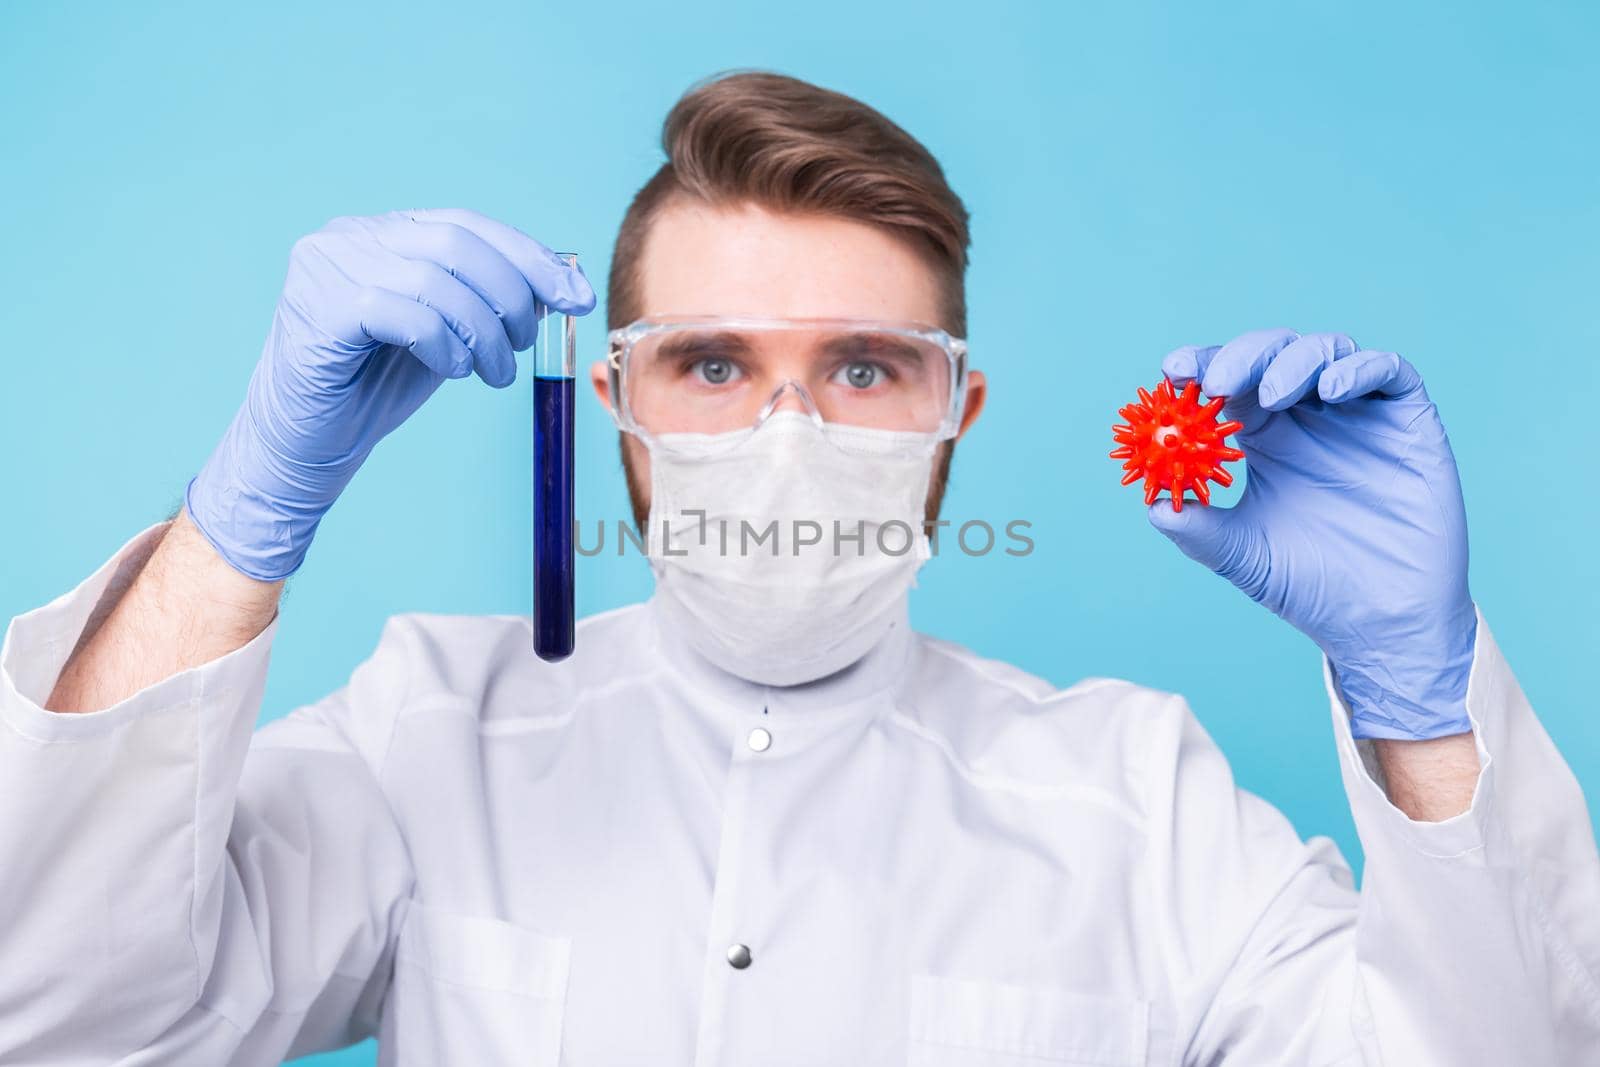 Covid-19, Vaccine development, pandemic, outbreak and medicine concept - Man scientist in flu mask and protective gloves holding a model of coronavirus and test tube. by Satura86